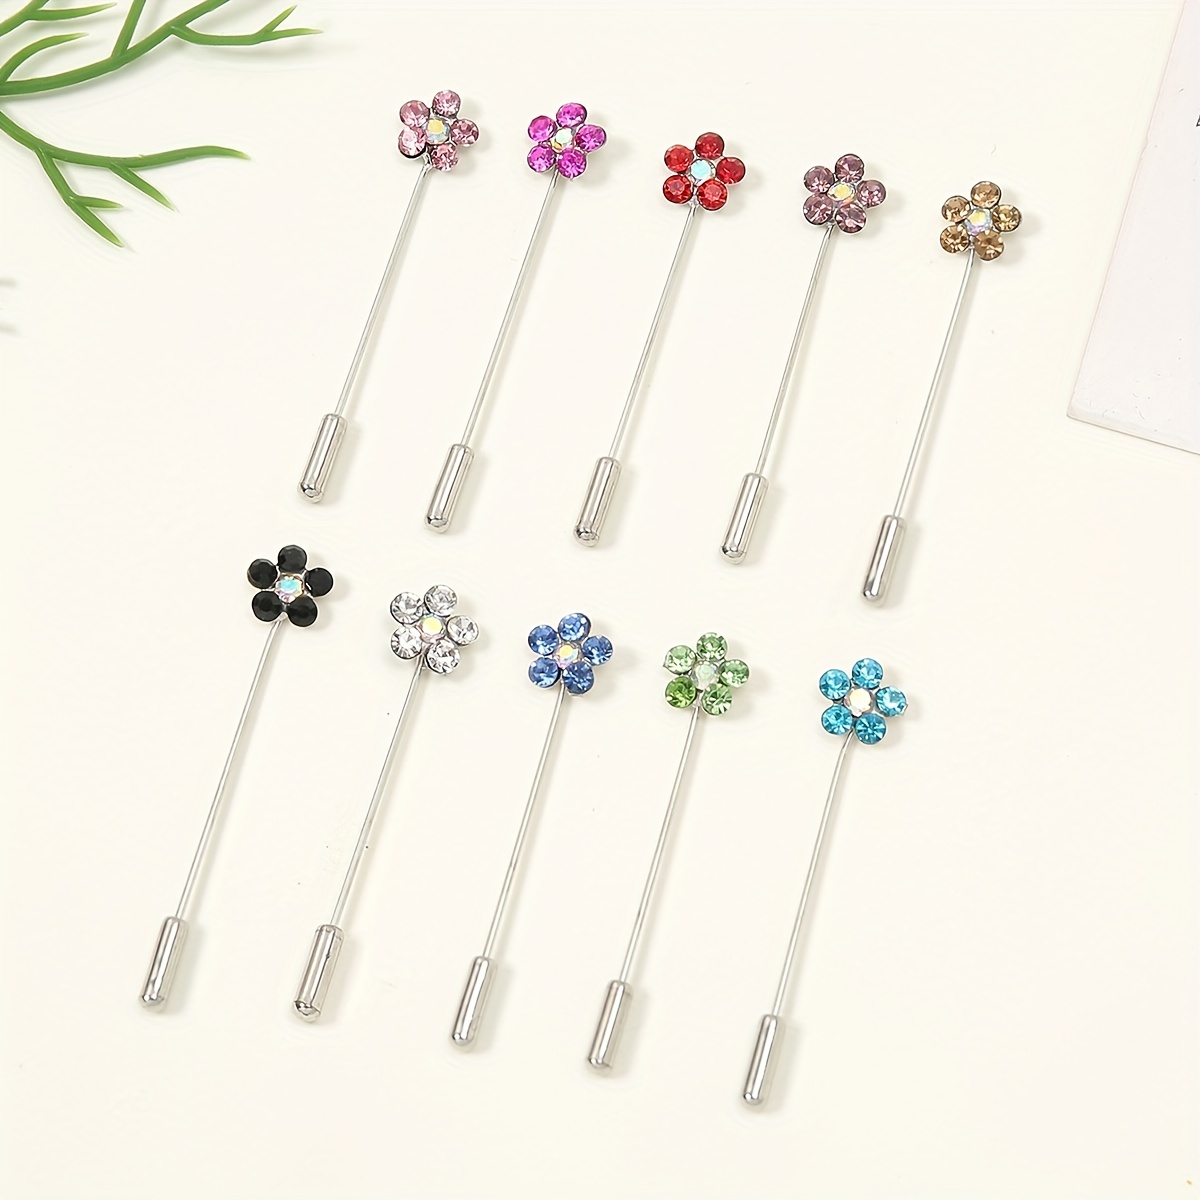 Cute Refined Crystal Rhinestone Branch Brooches Hijab Pins For Women Suit  Scarf Flower Brooch Pin Jewelry